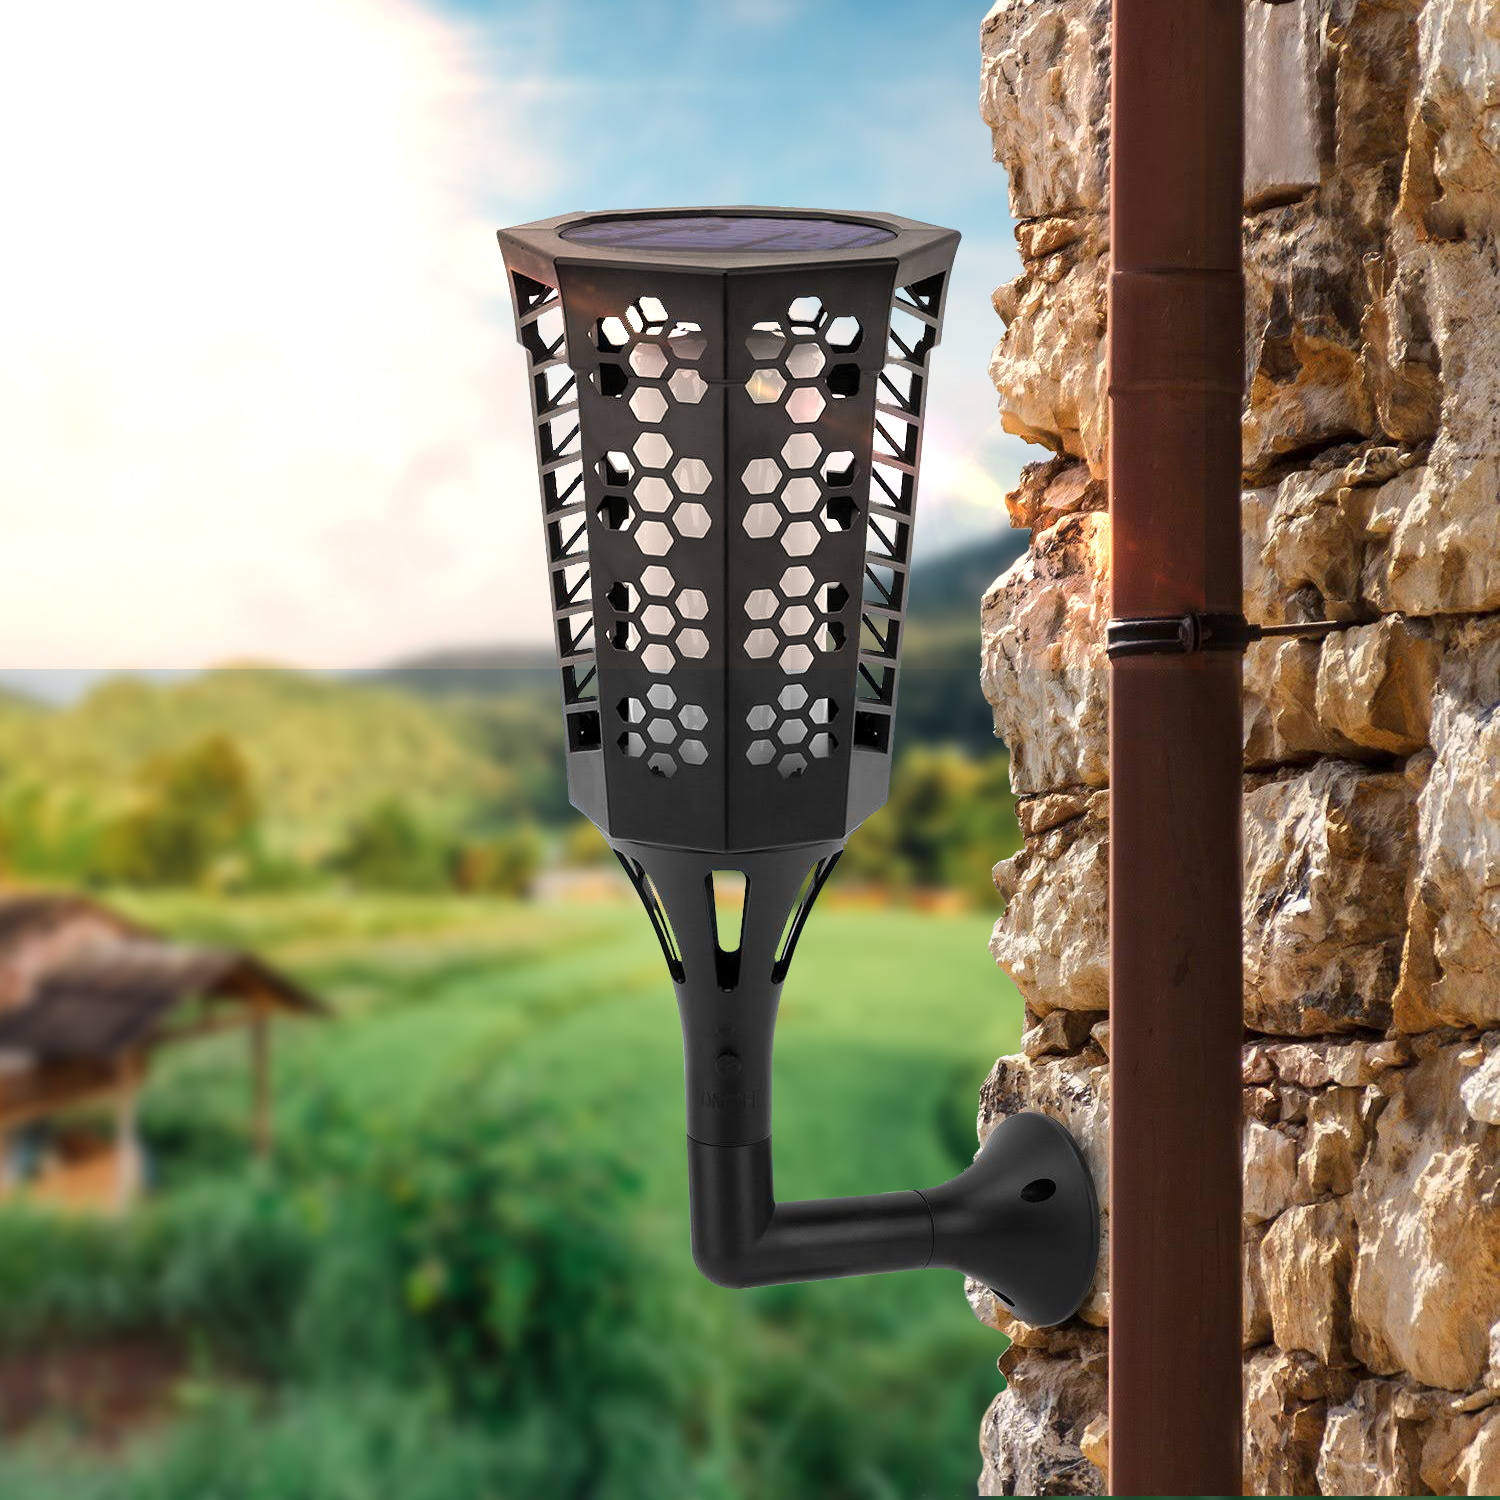 Realistic 66 LED Flickering Solar Flame Wall Light for outdoor garden